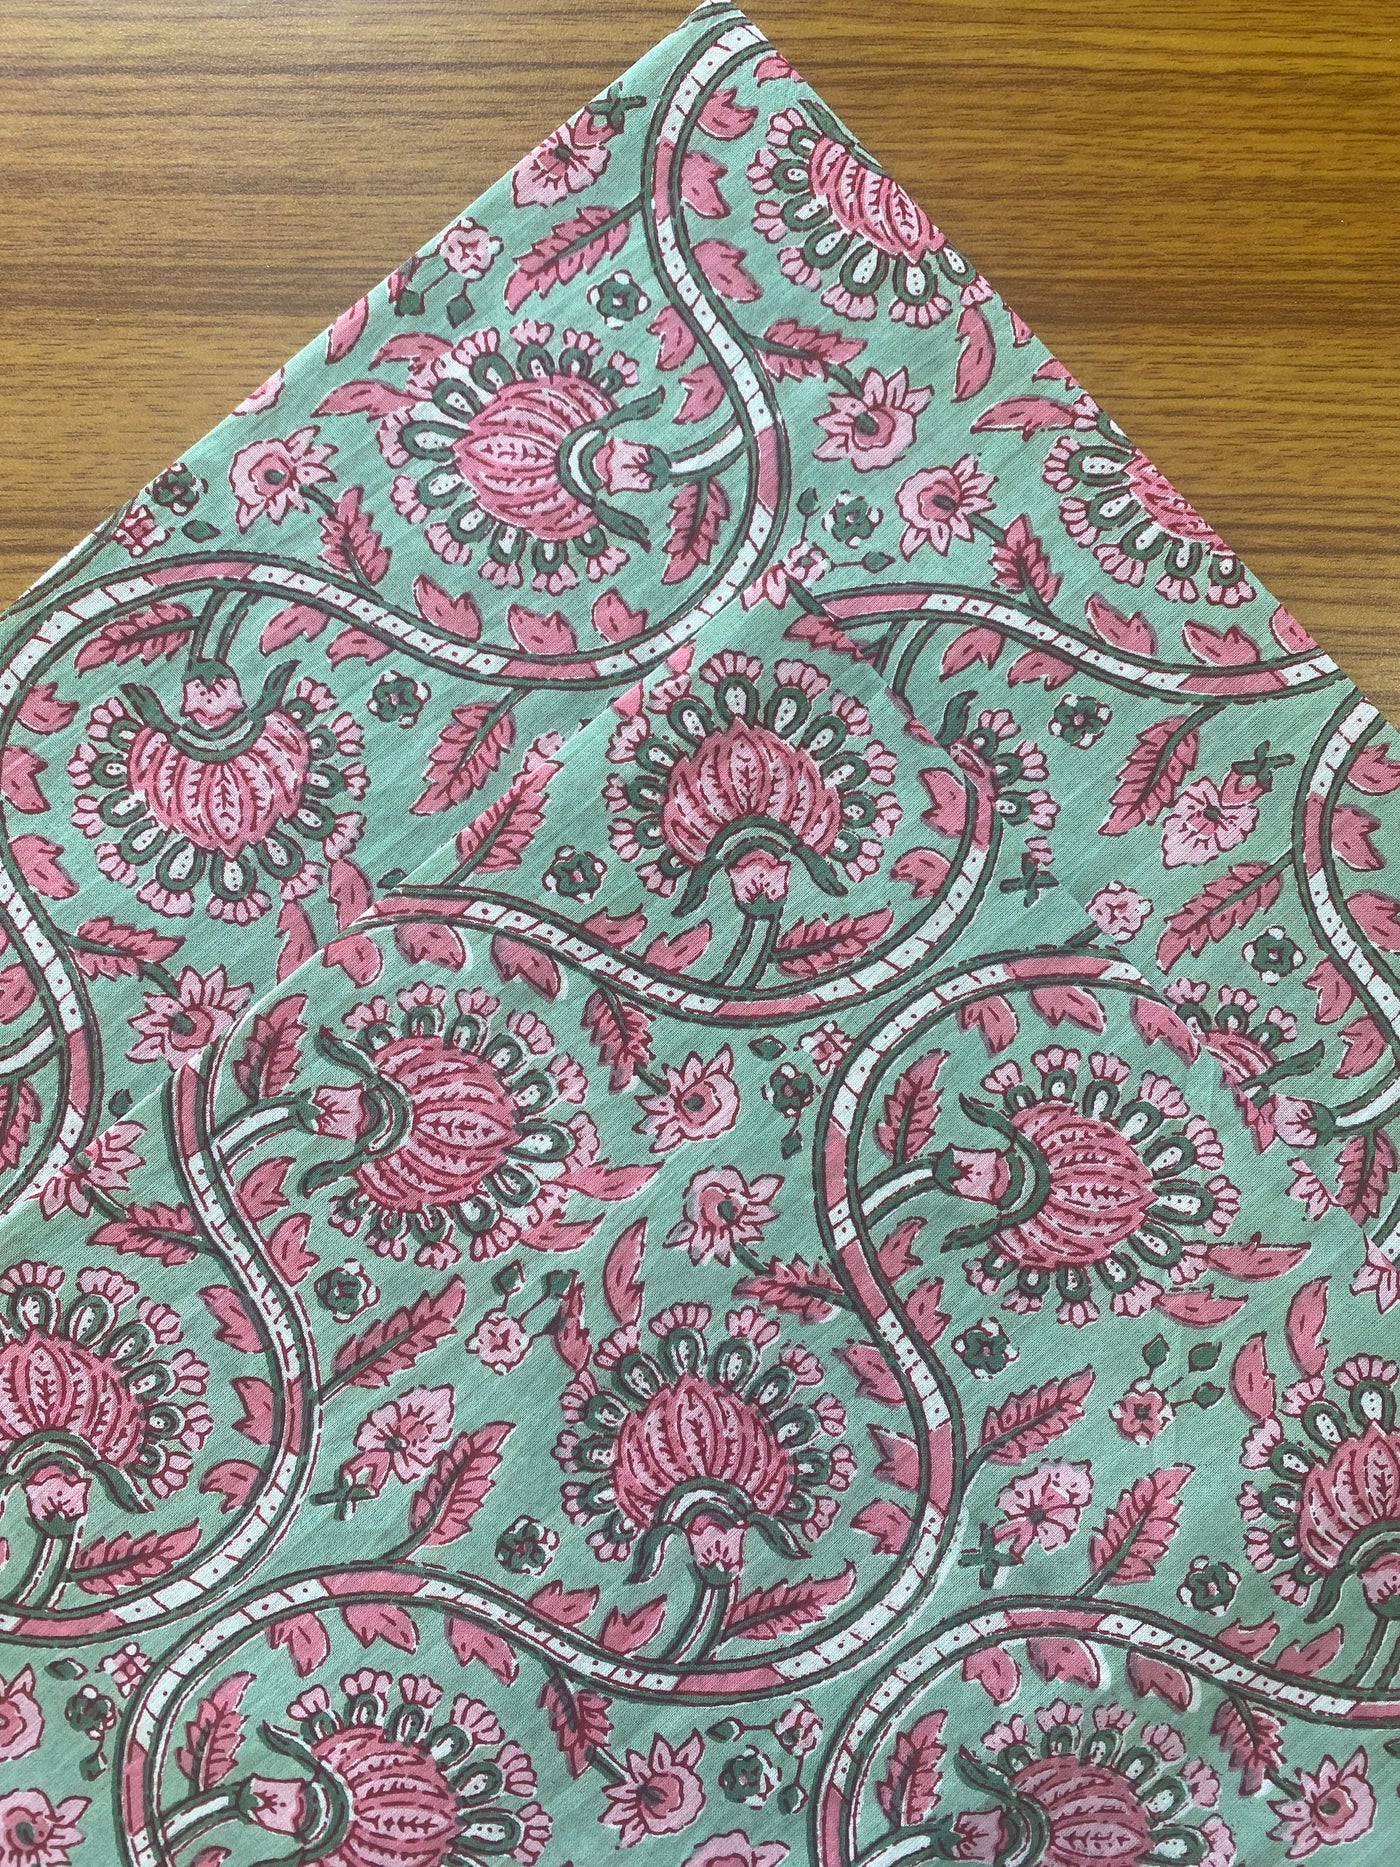 Fabricrush Tea and Middle Green, Salmon Pink Indian Floral Hand Block Printed Pure Cotton Cloth Napkins, 18x18"- Cocktail Napkins, 20x20"- Dinner Napkins